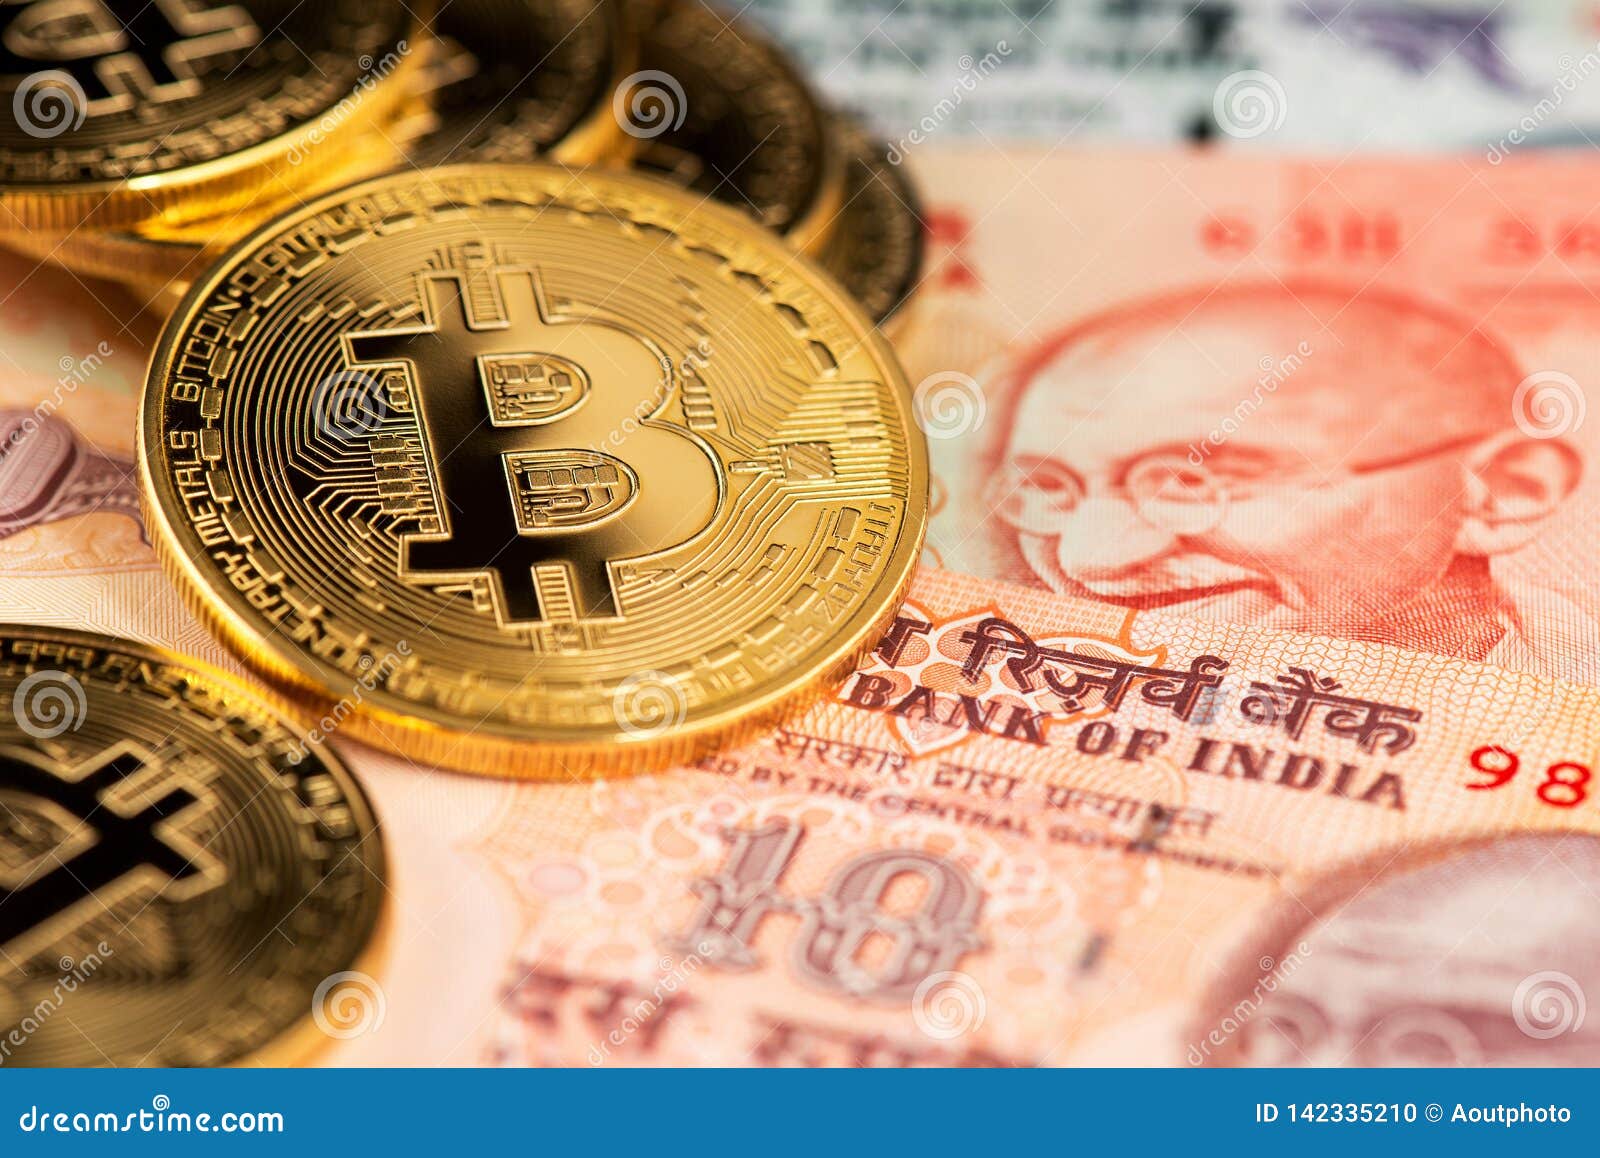 bitcoin in indian rupees